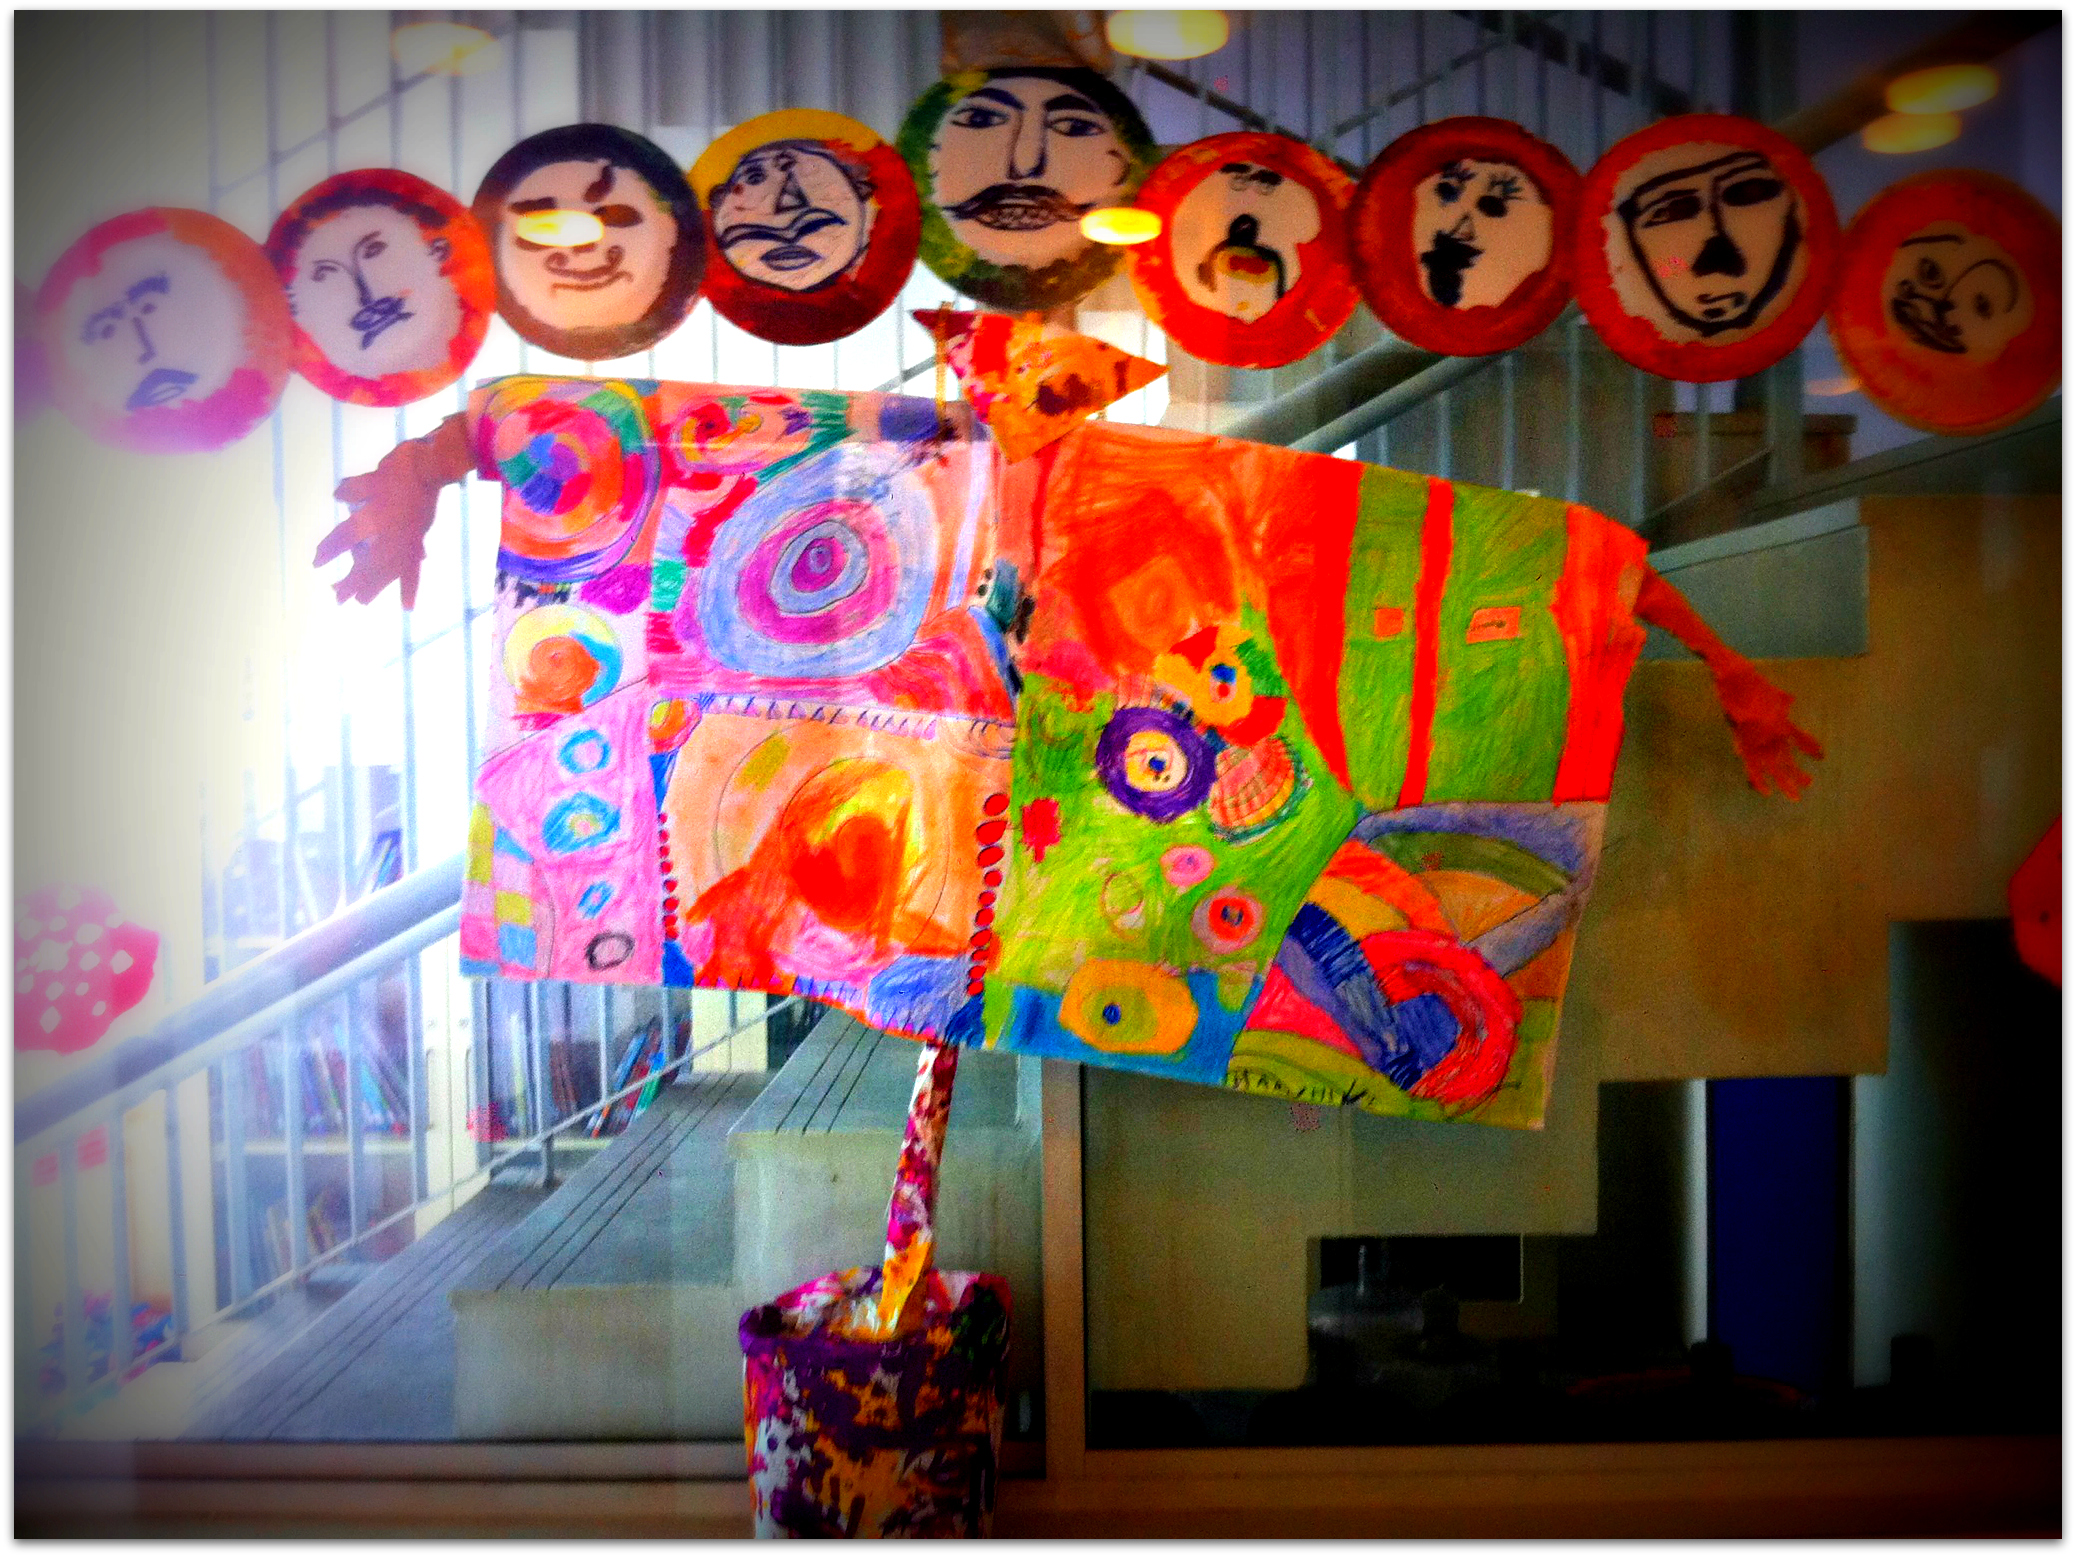 The ten heads of Raavan done by the snubnose and her class mates. The ten heads are actually paper plates